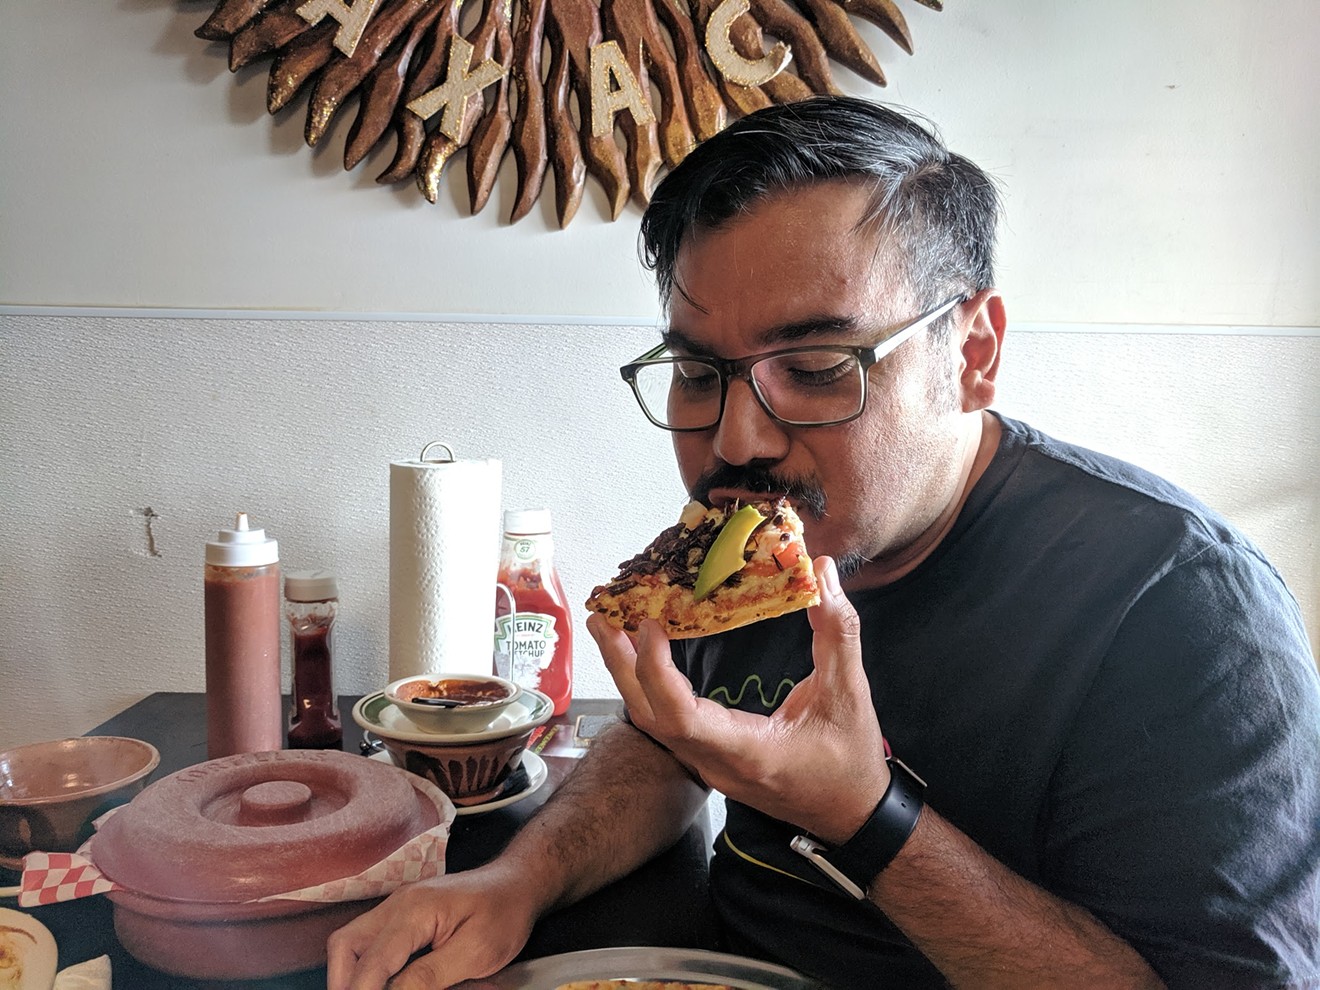 José Ralat, Texas Monthly's new taco editor, chomps down on a slice of Mexican chapulín (grasshopper) pizza.